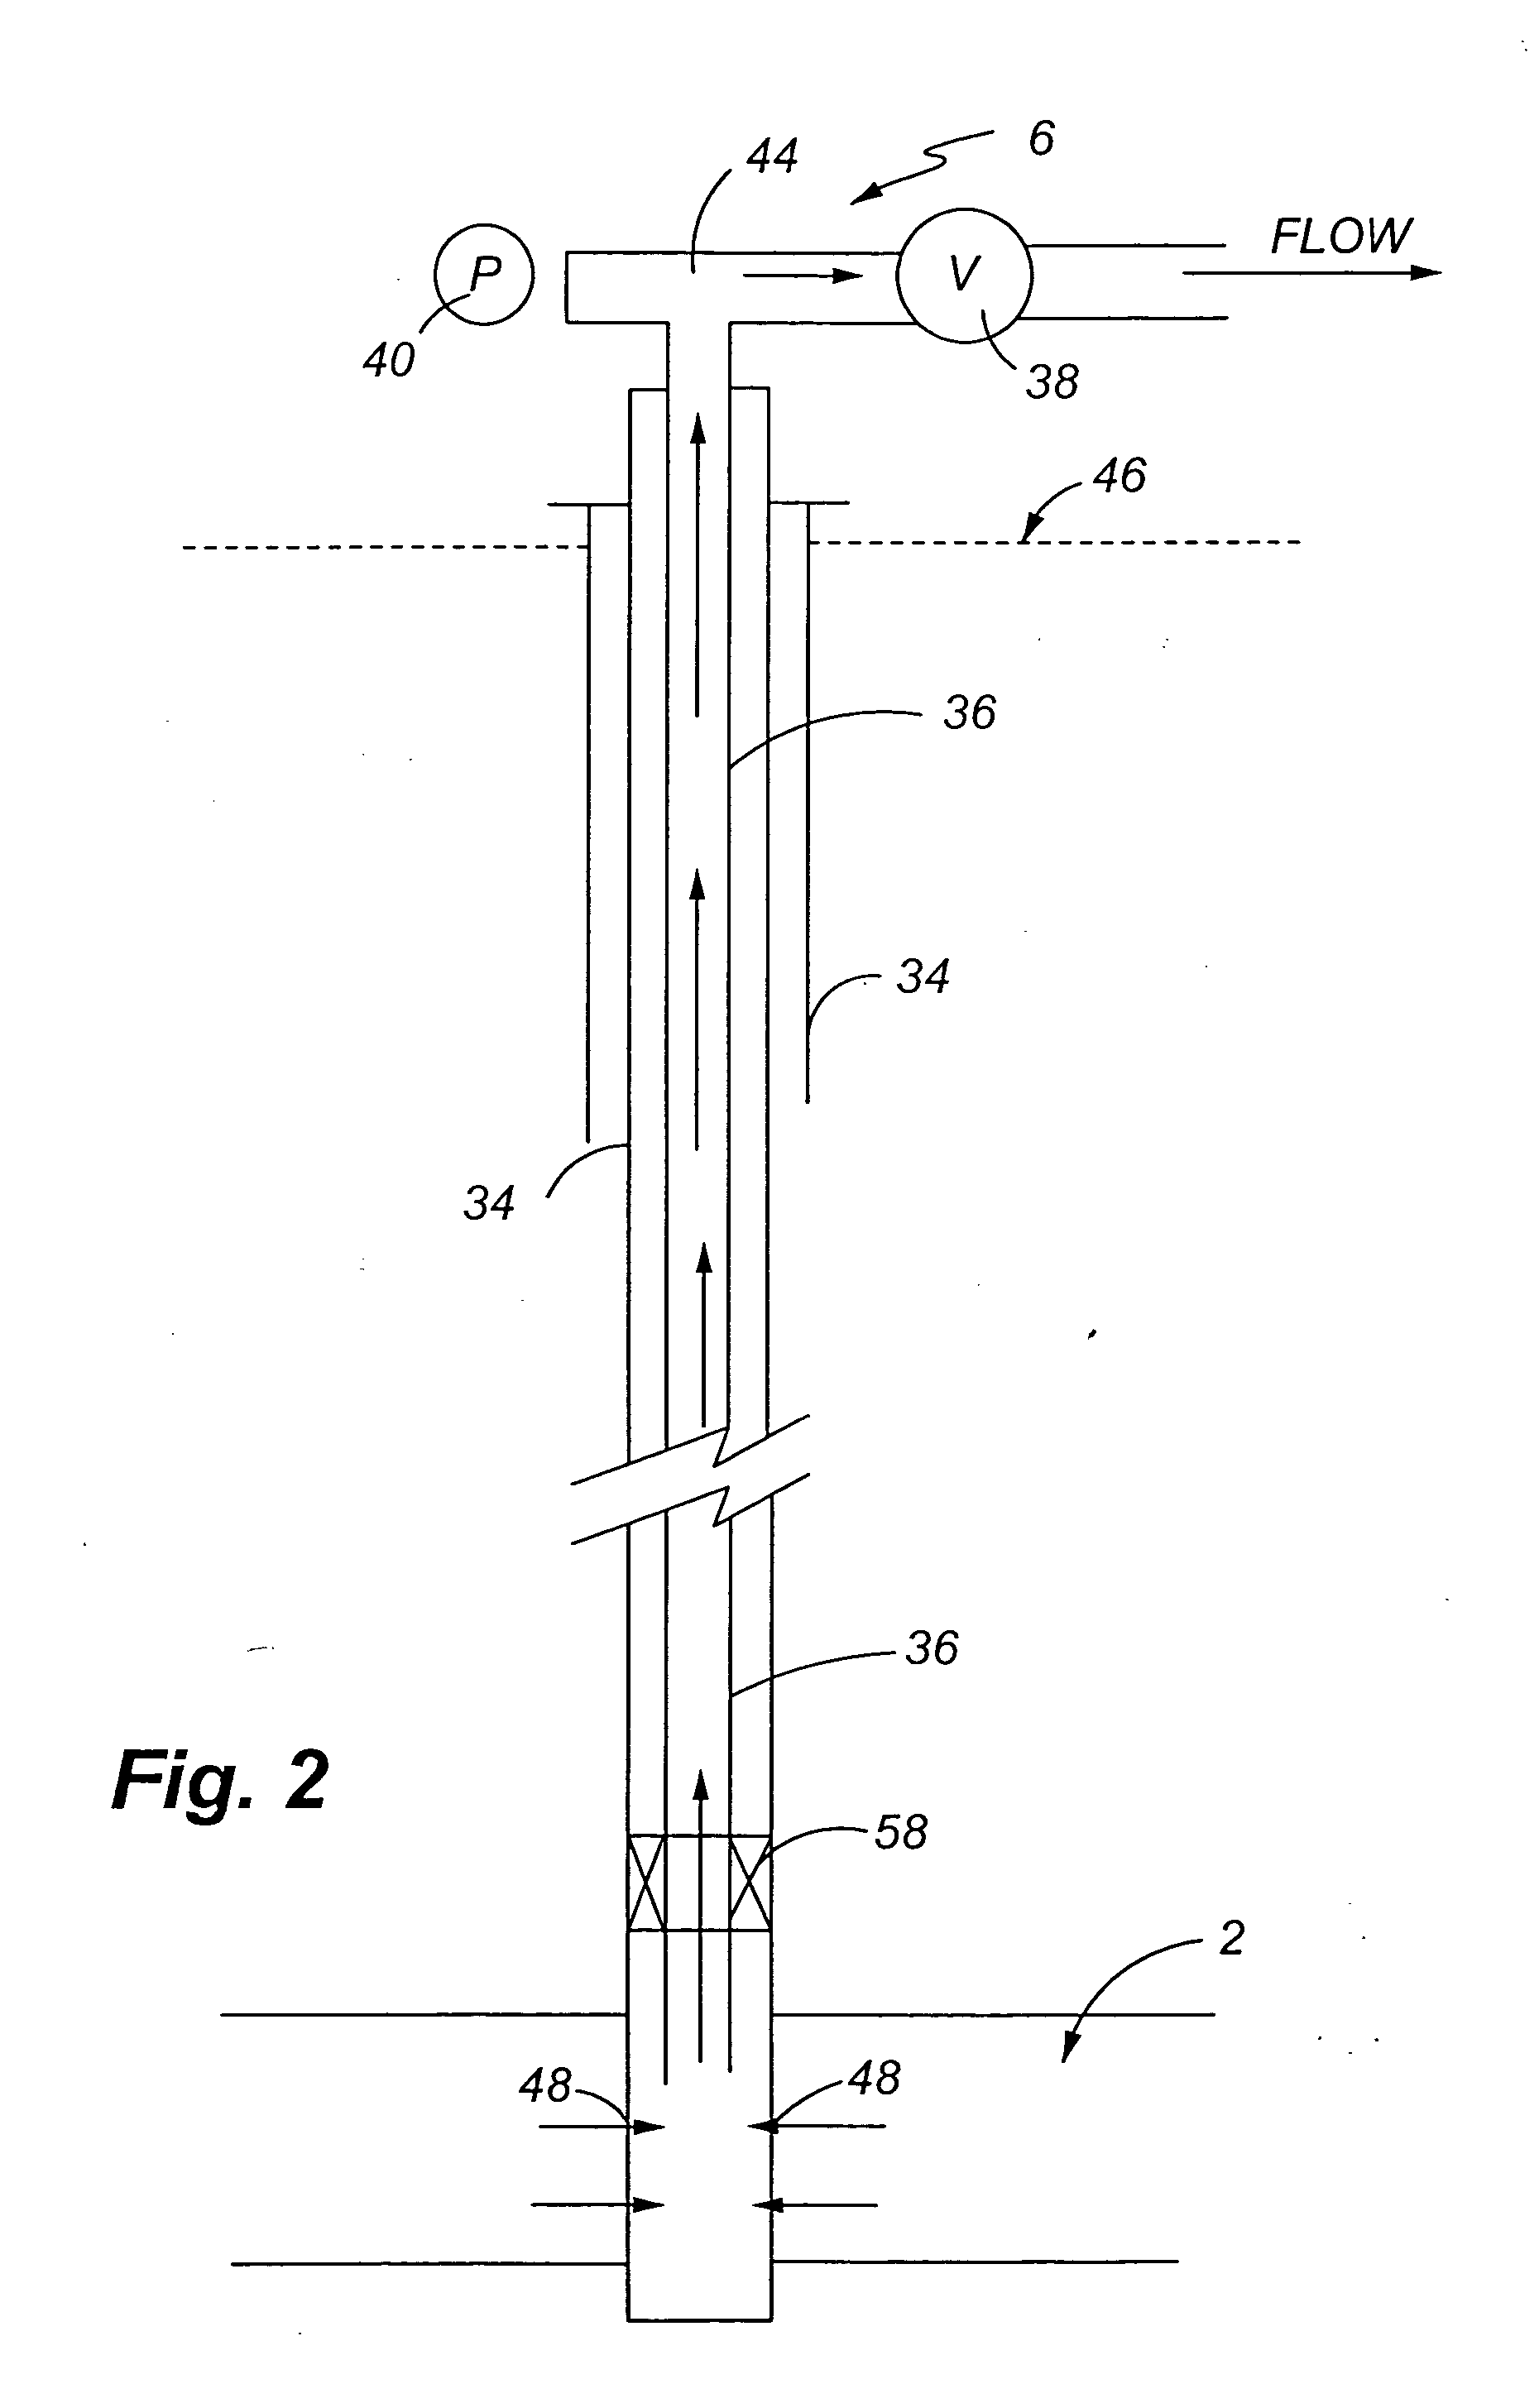 Method and apparatus for generating pollution free electrical energy from hydrocarbons